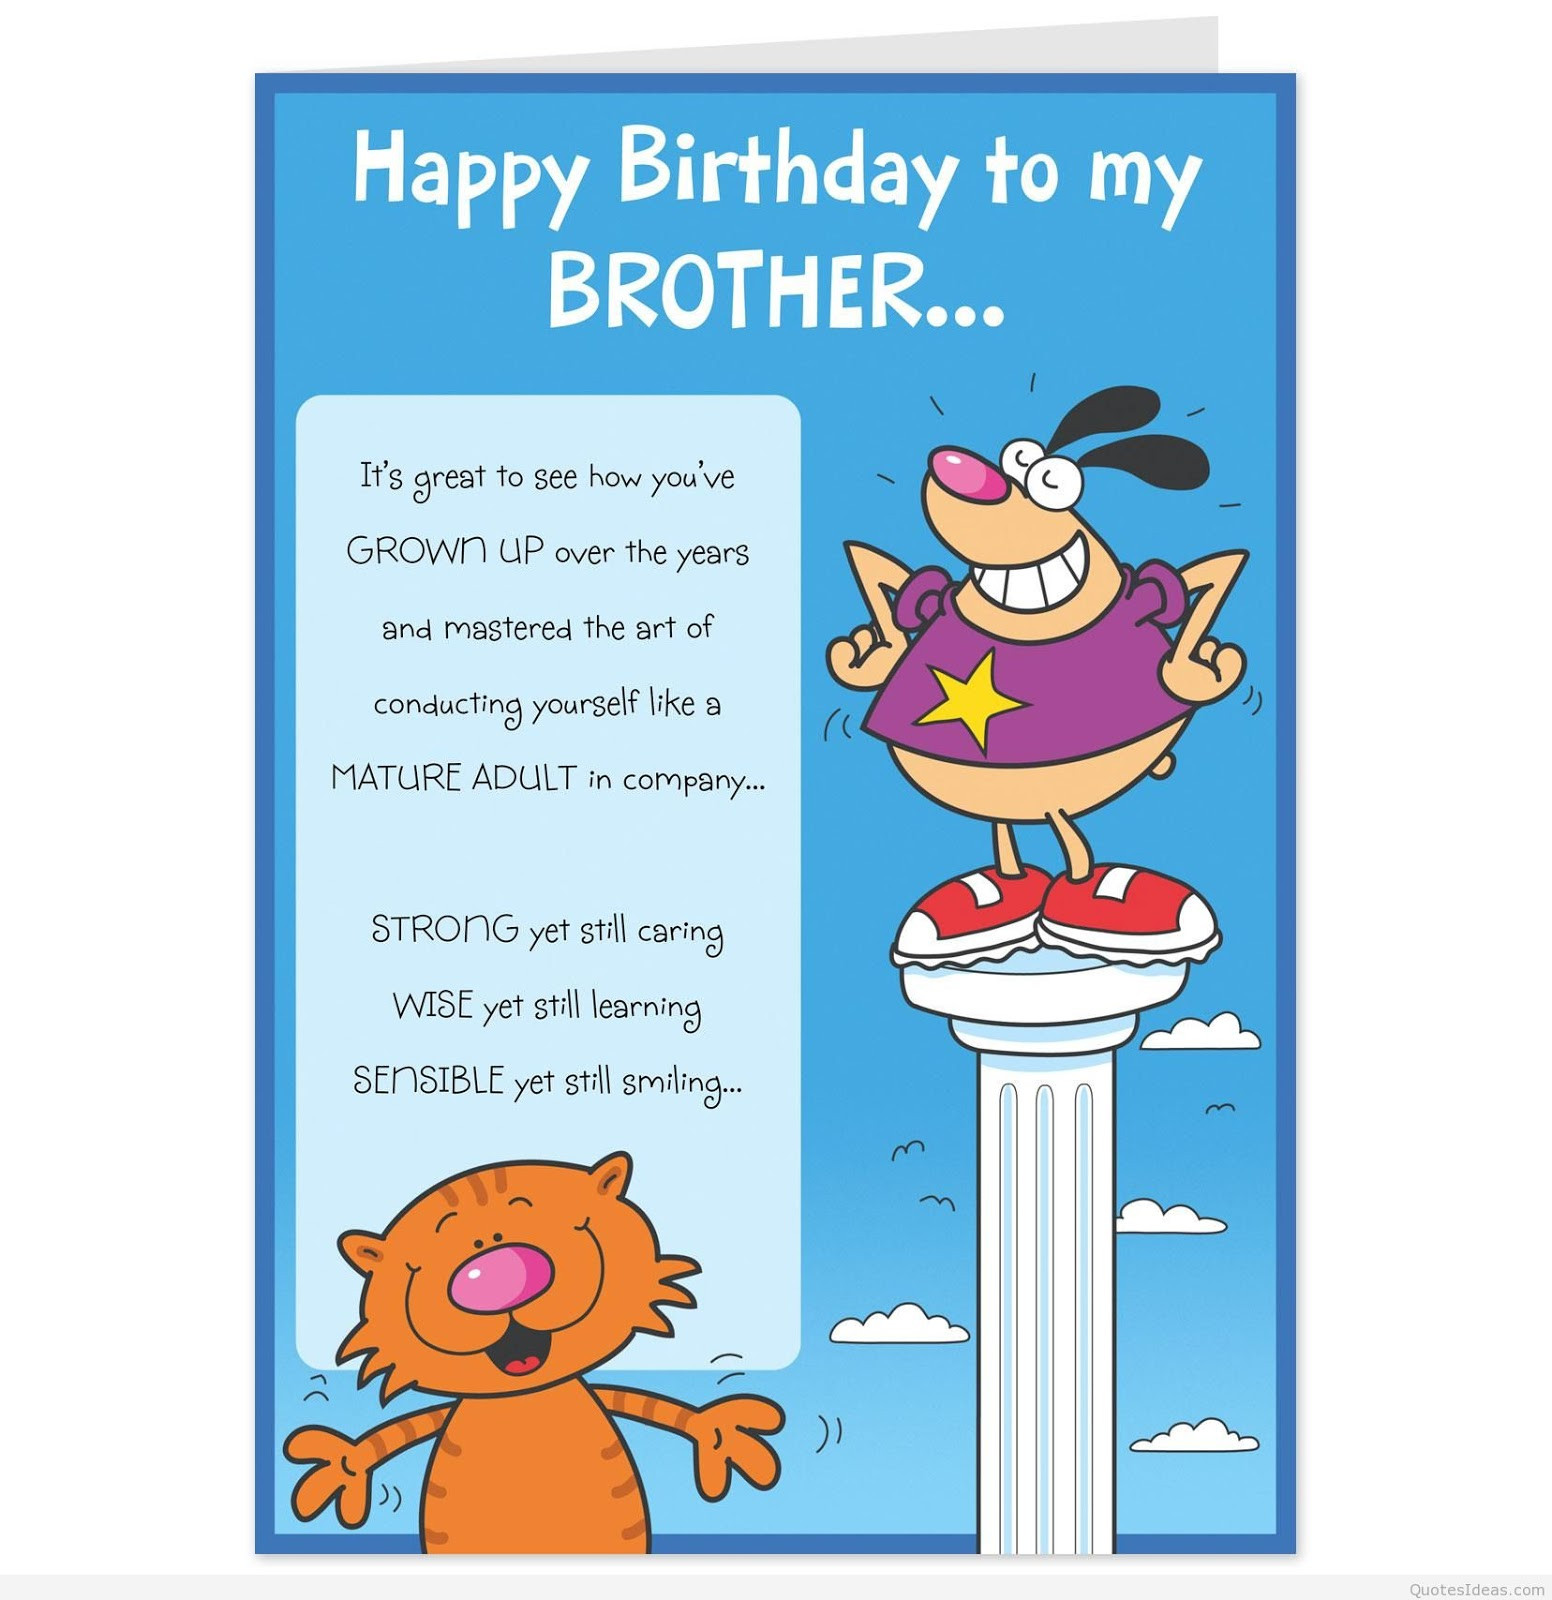 Funny Happy Birthday Quotes For Brother
 HAPPY BIRTHDAY BROTHER QUOTES quotes for brother Good